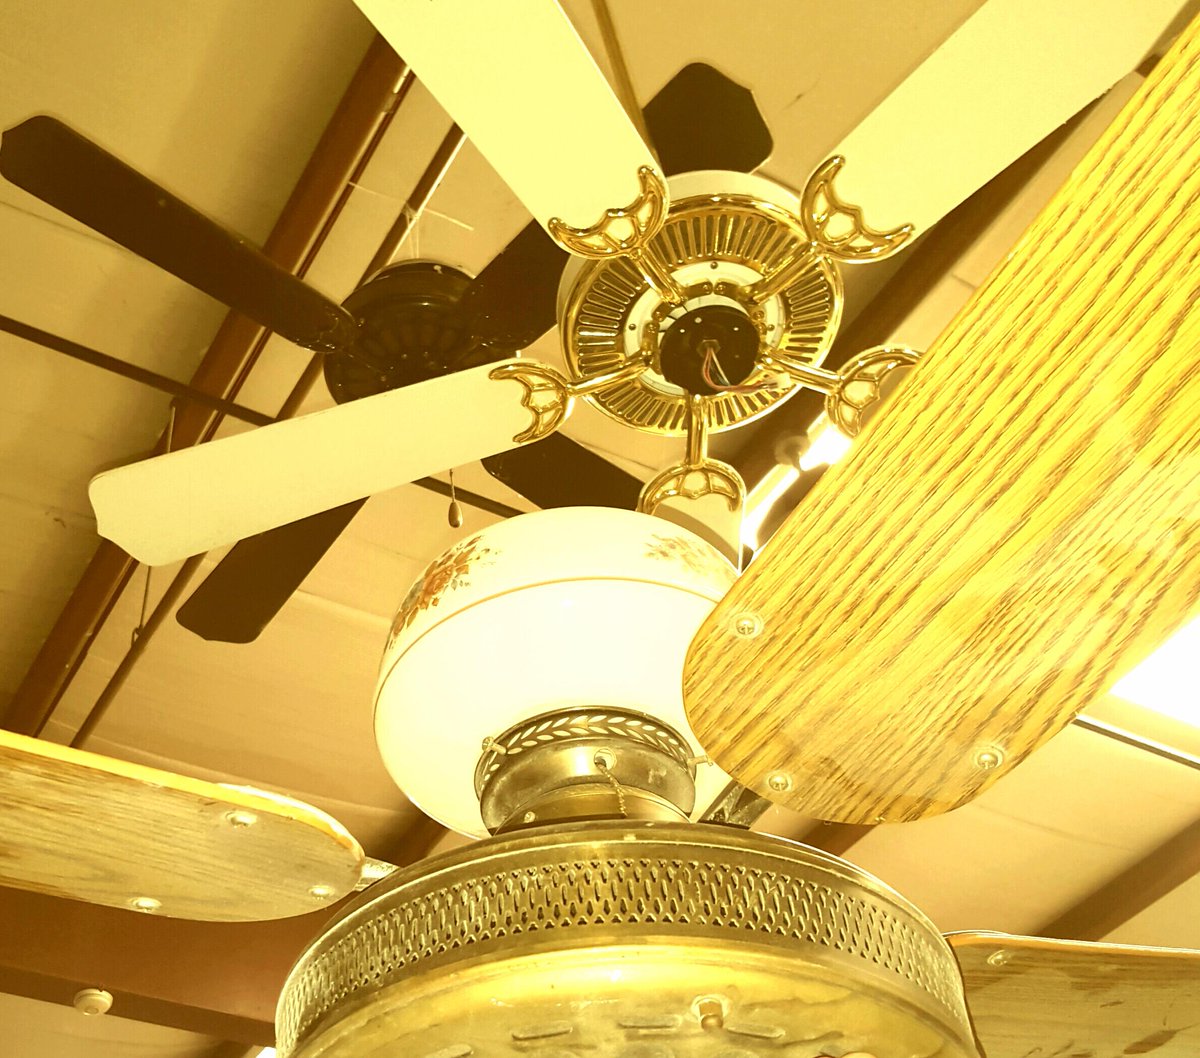 Athens Area Habitat On Twitter Ceiling Fans For Only 2 This